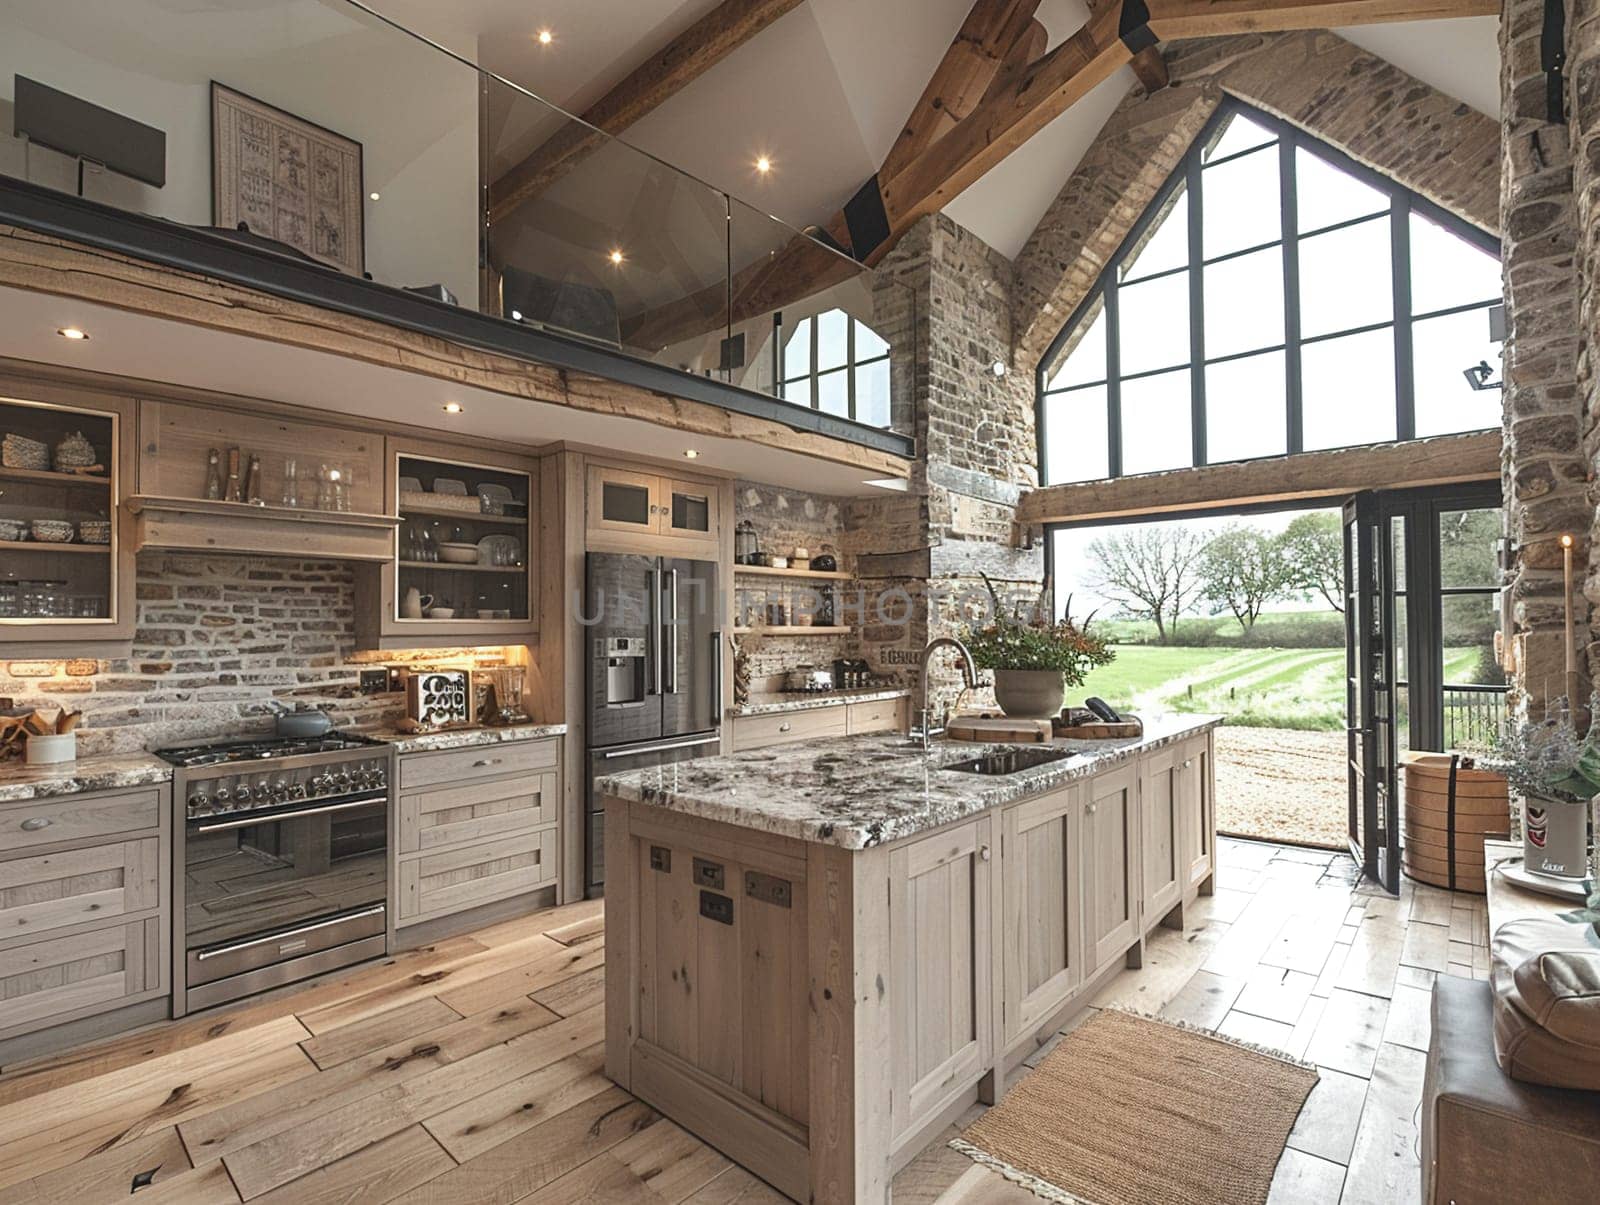 Rustic barn conversion with exposed beams and modern touches